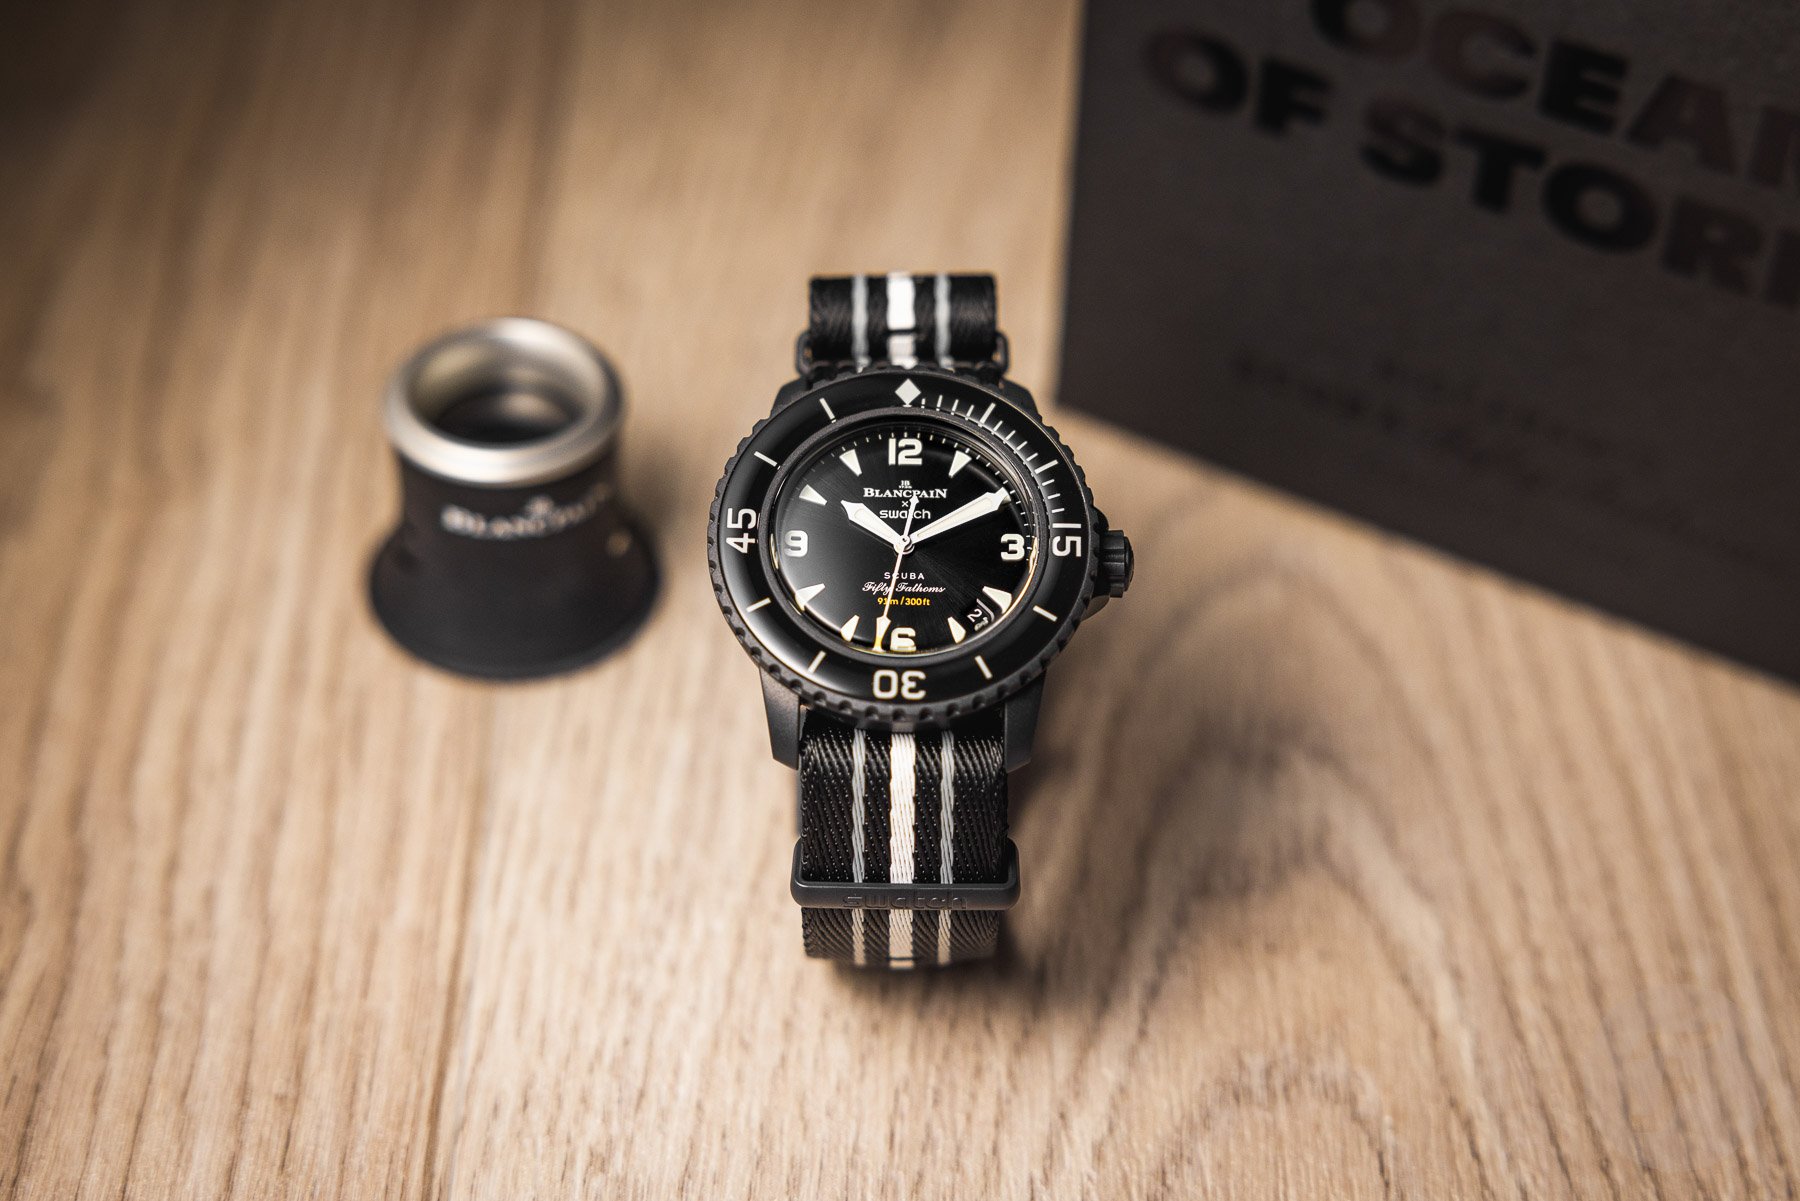 ocean - Blancpain X Swatch ? - Page 4 Blancpain-%C3%97-Swatch-Bioceramic-Scuba-Fifty-Fathoms-Ocean-Of-Storms-12